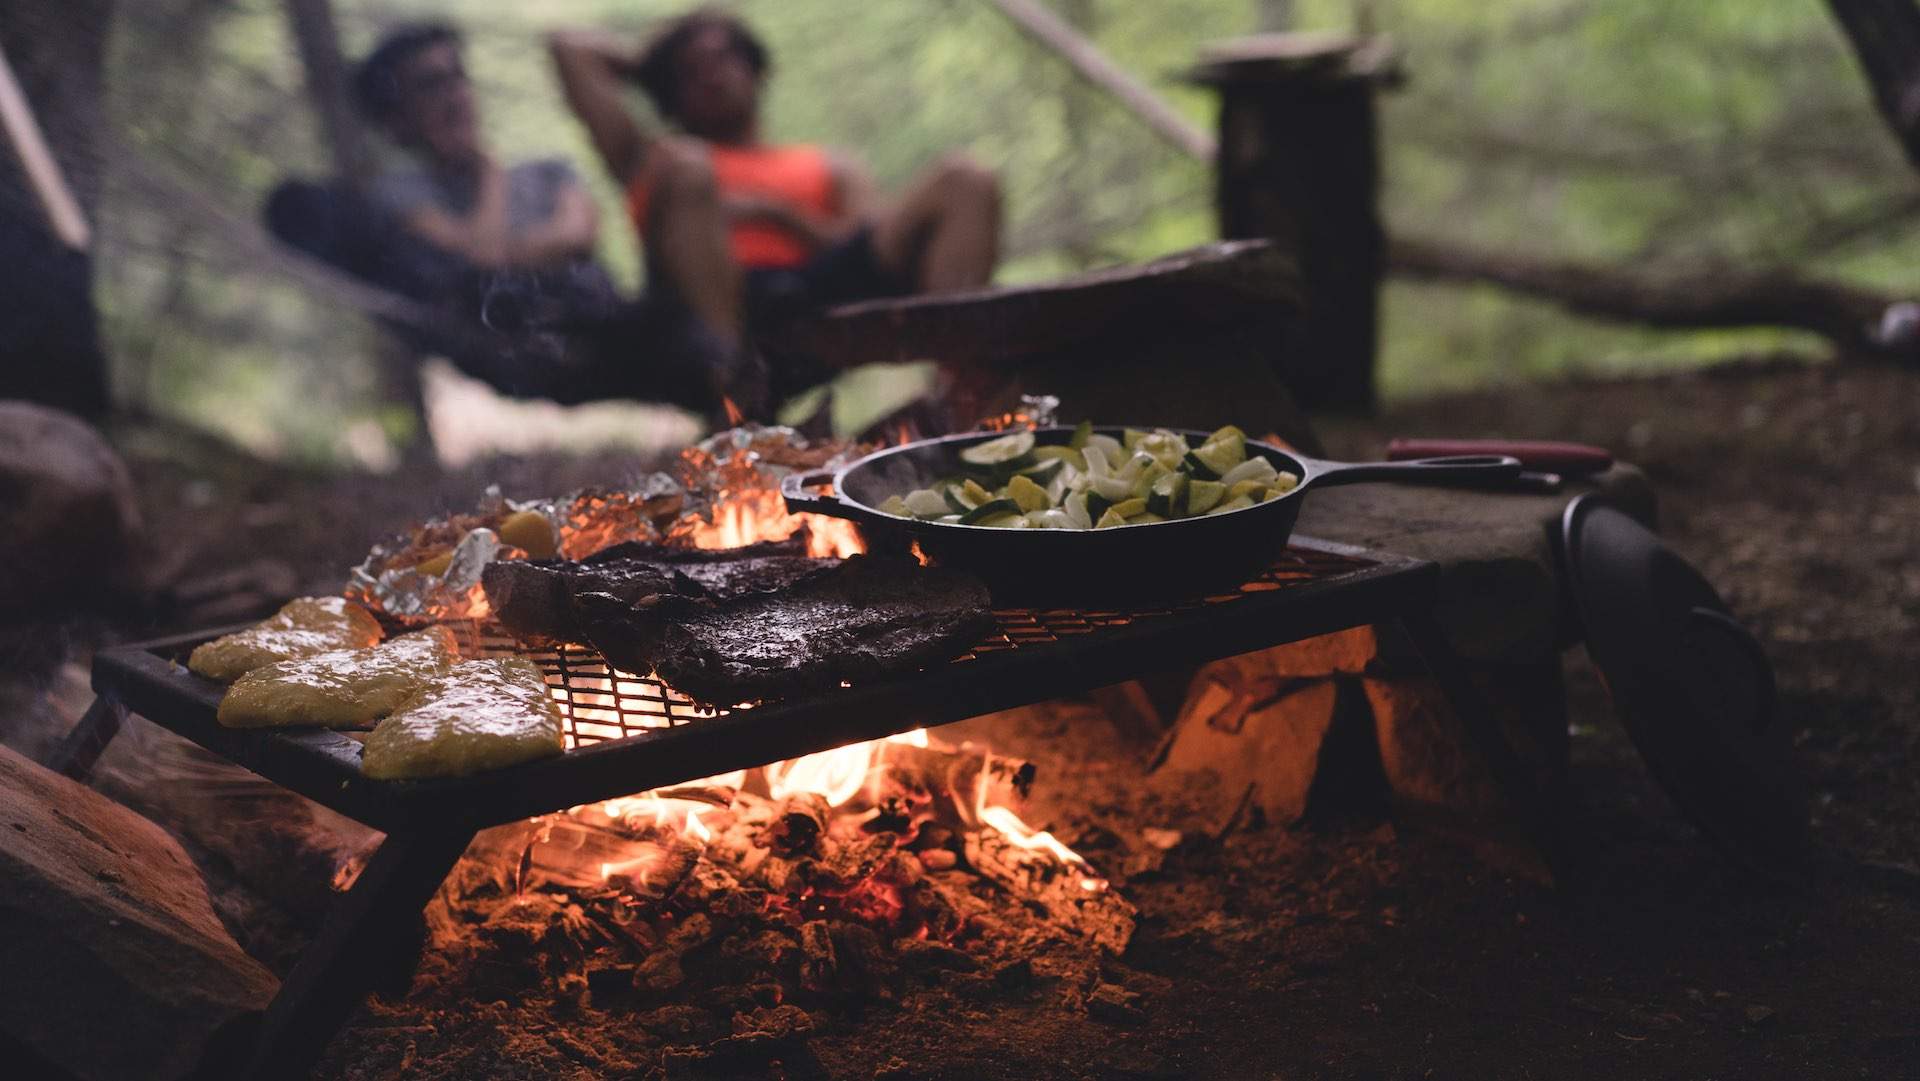 Ten Food Hacks to Try on Your Next Camping Trip